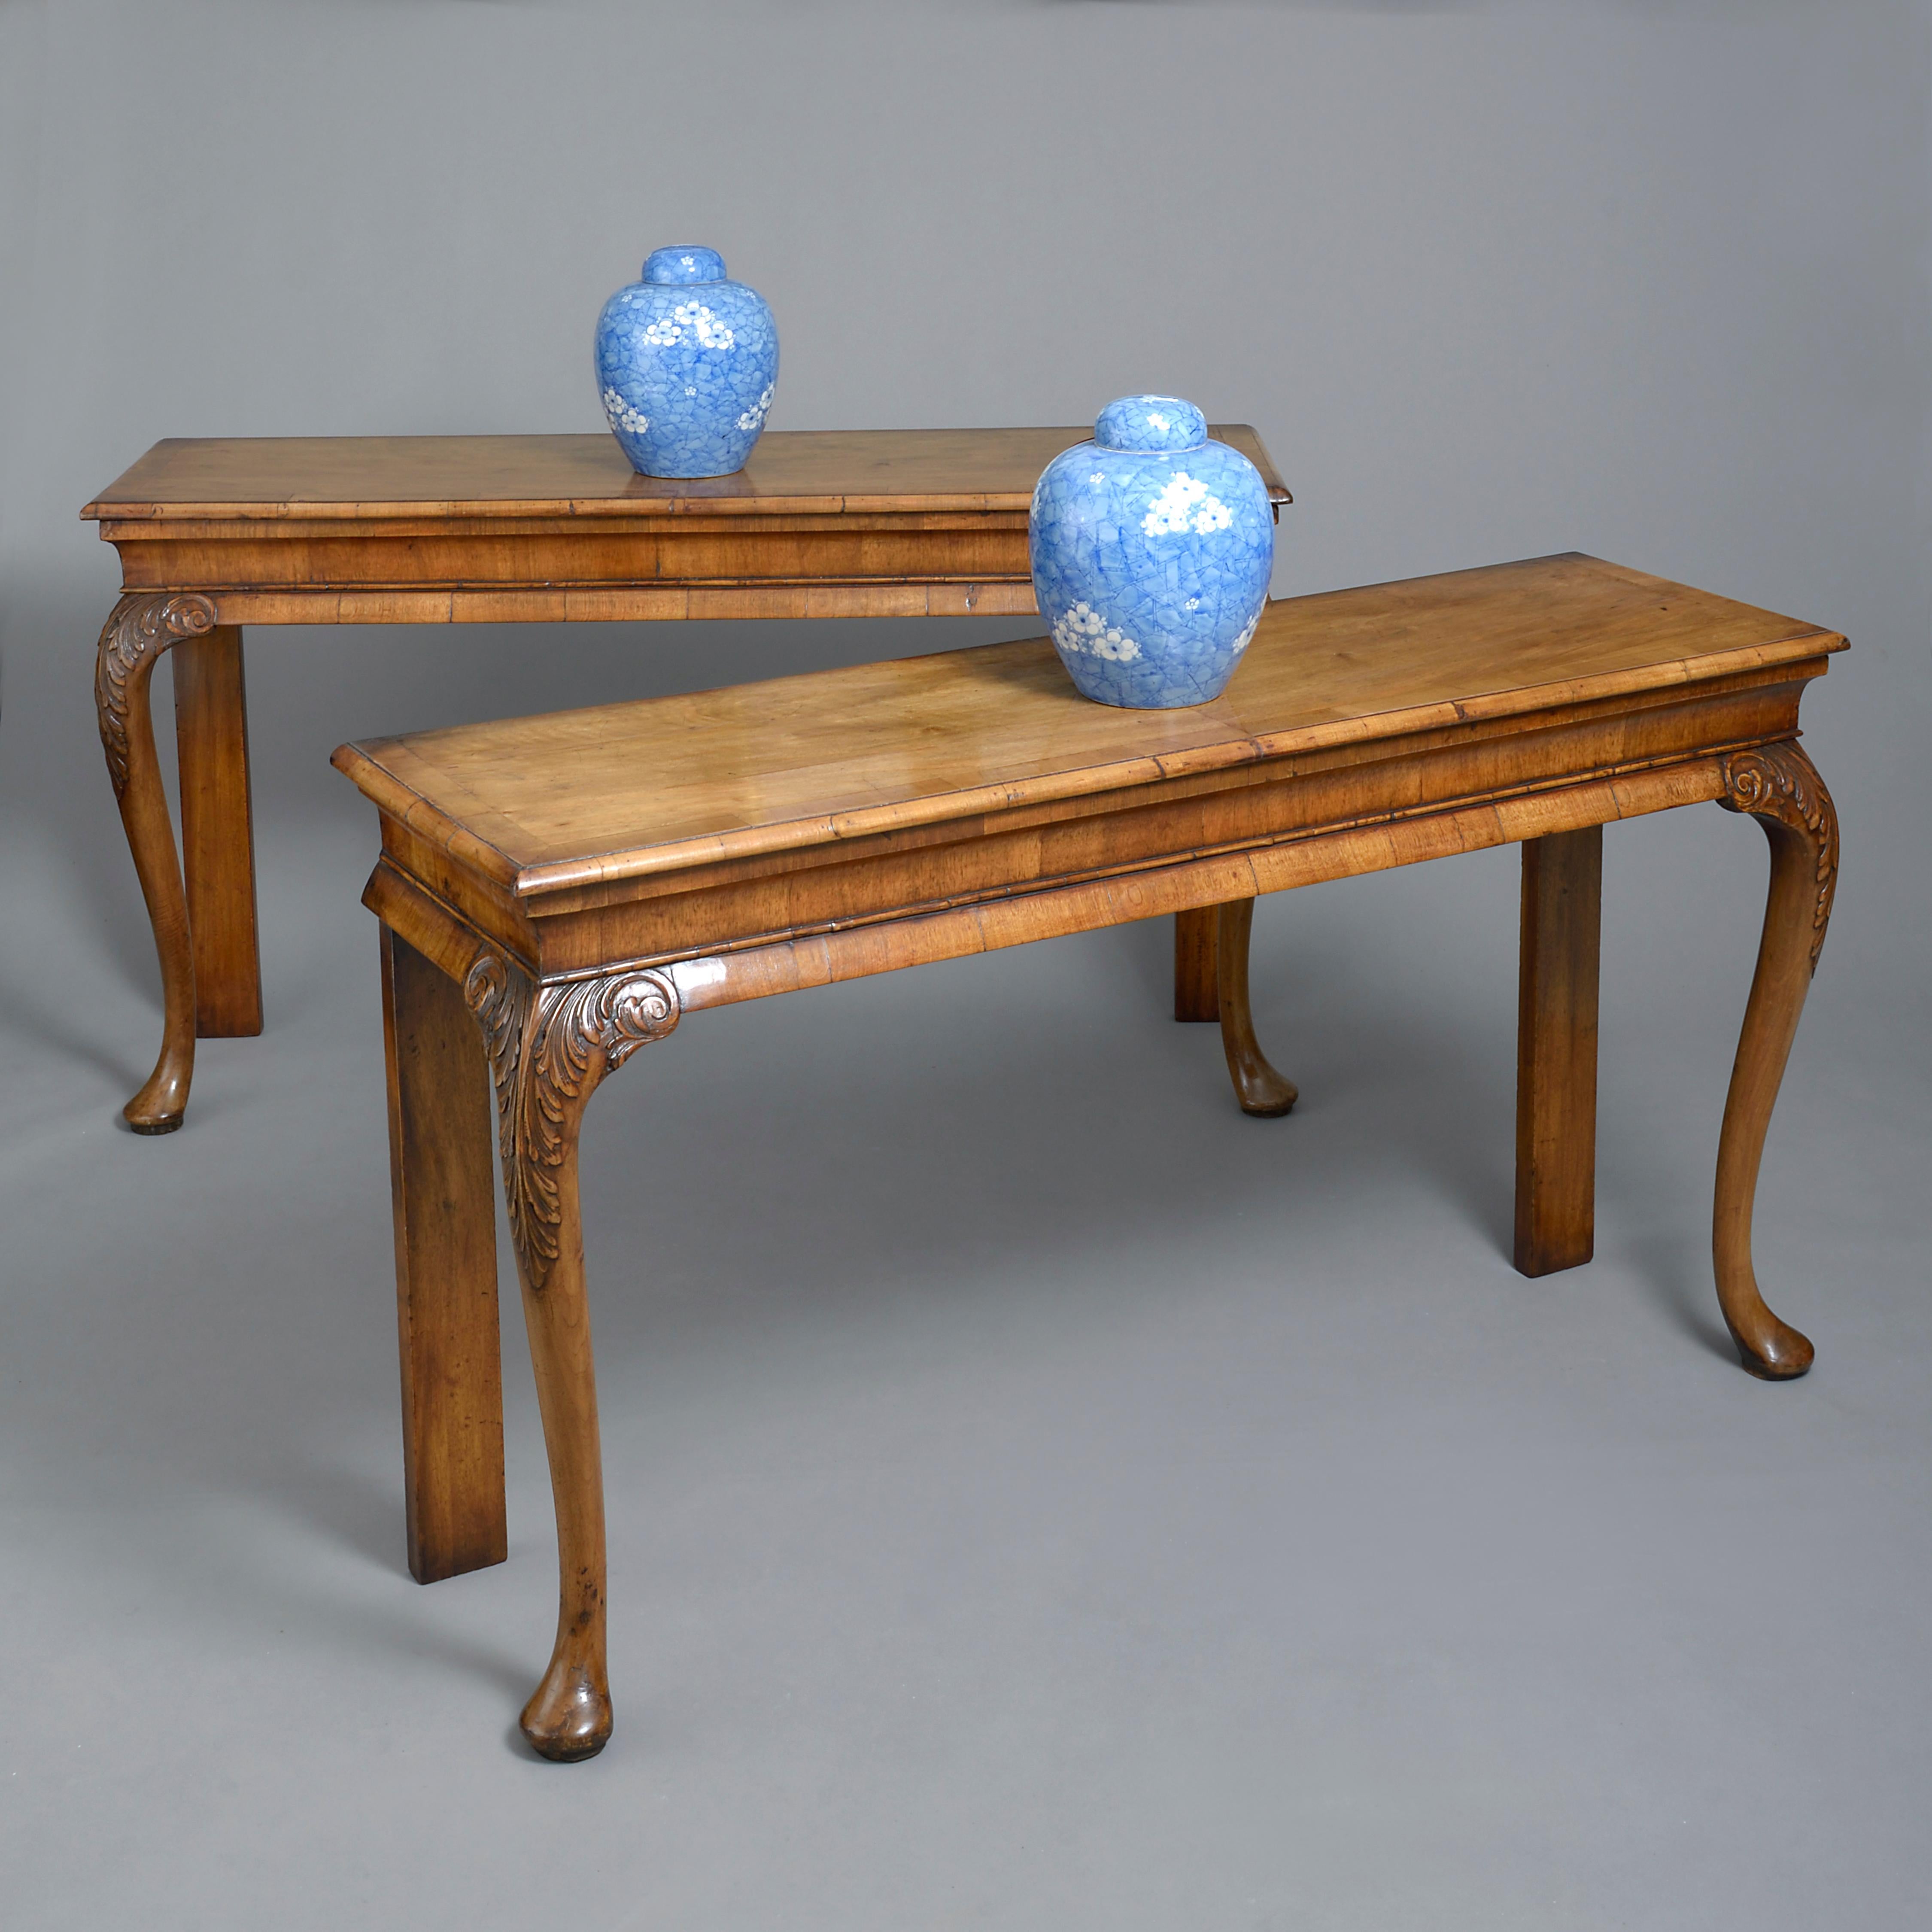 A fine pair of late 19th century pier tables in the George I manner, each crossbanded veneered top above a frieze and set upon finely carved cabriole legs with acanthus carving and pad feet.

 